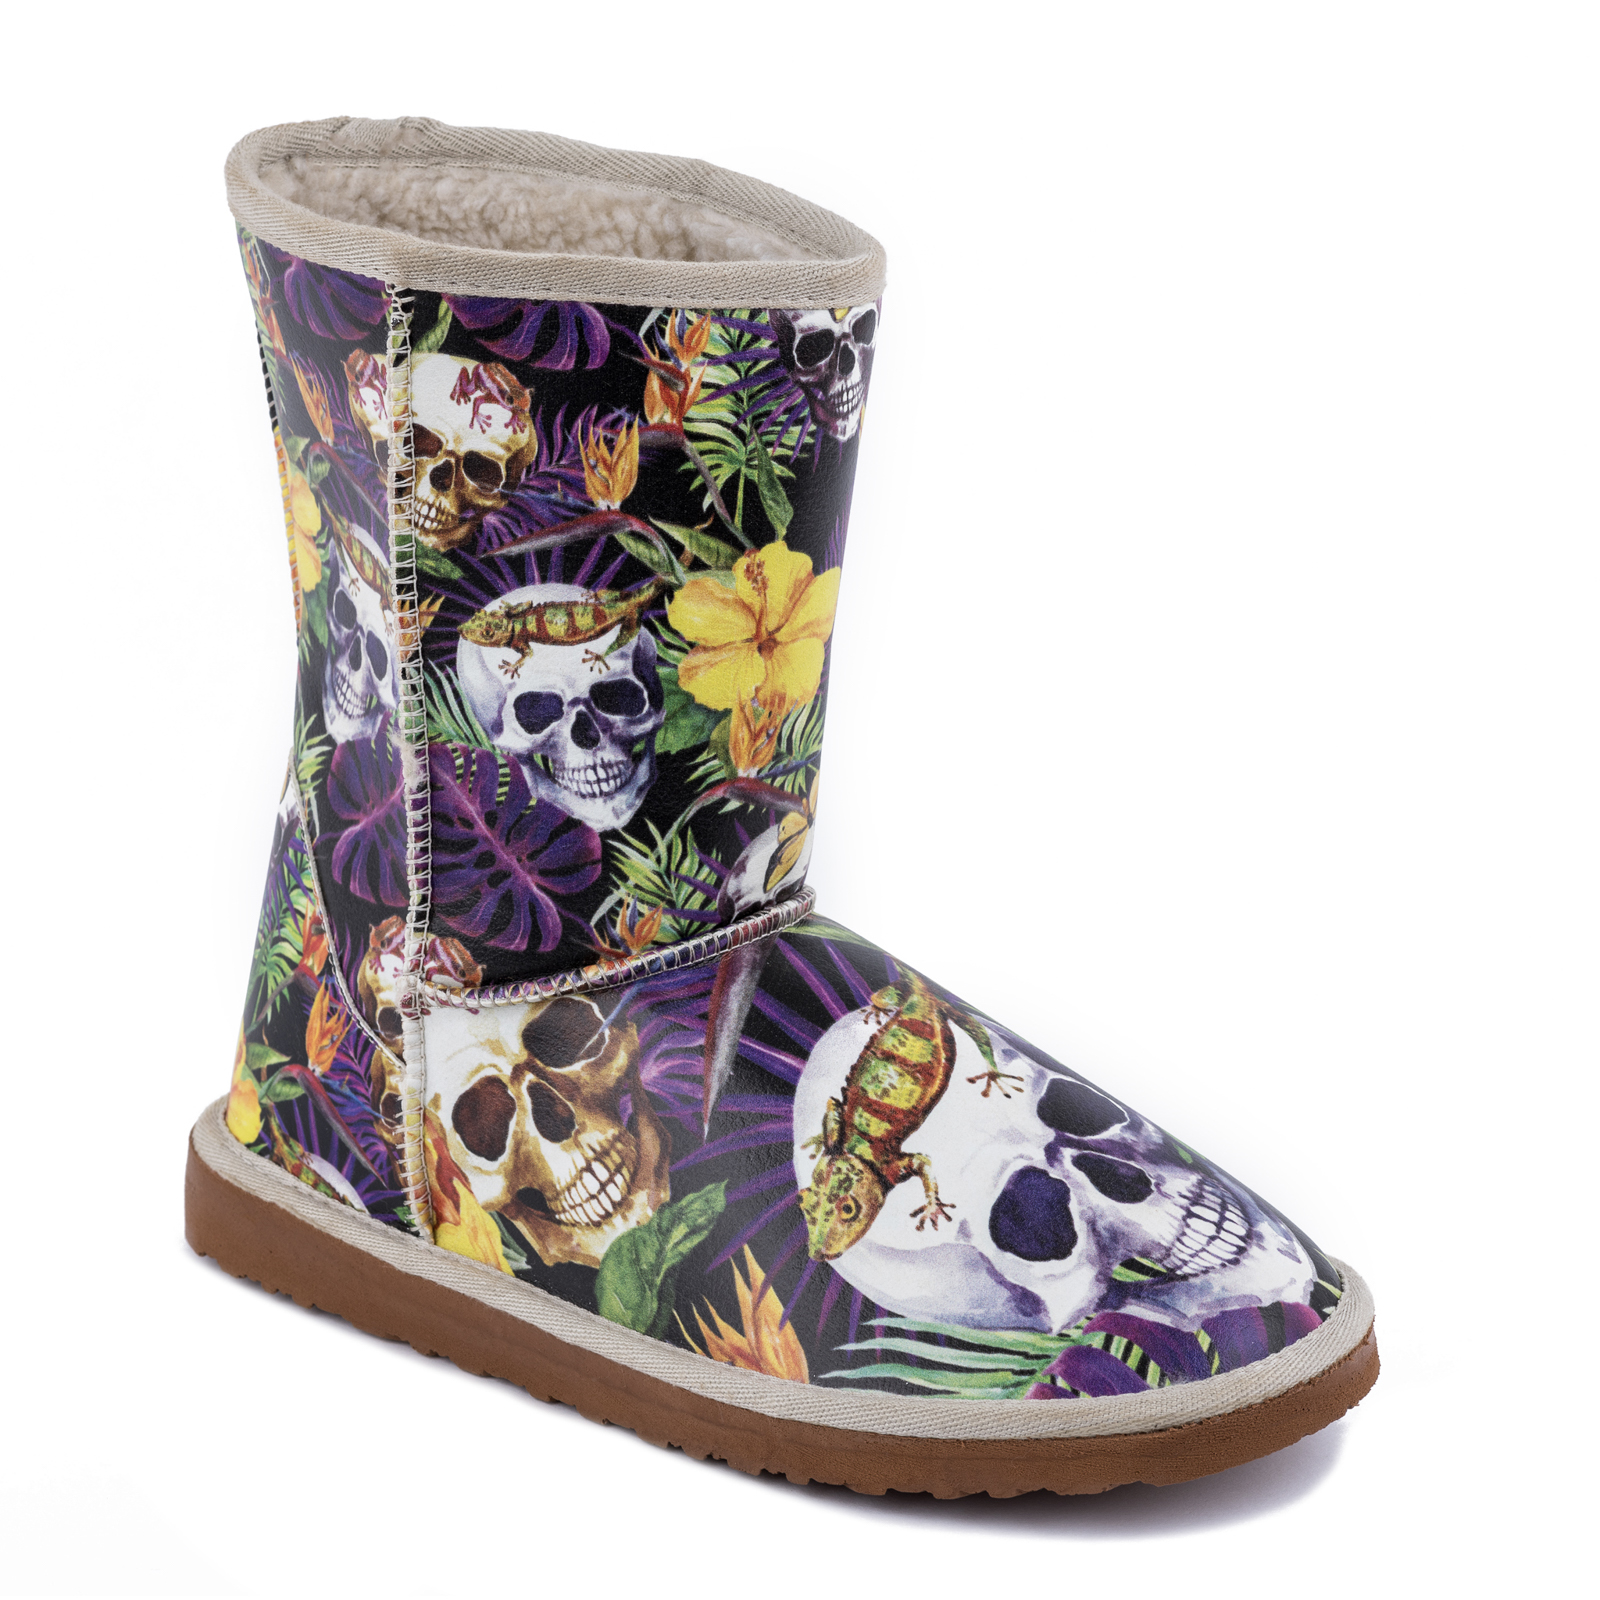 SKULL COLORFUL SNOE BOOTS 